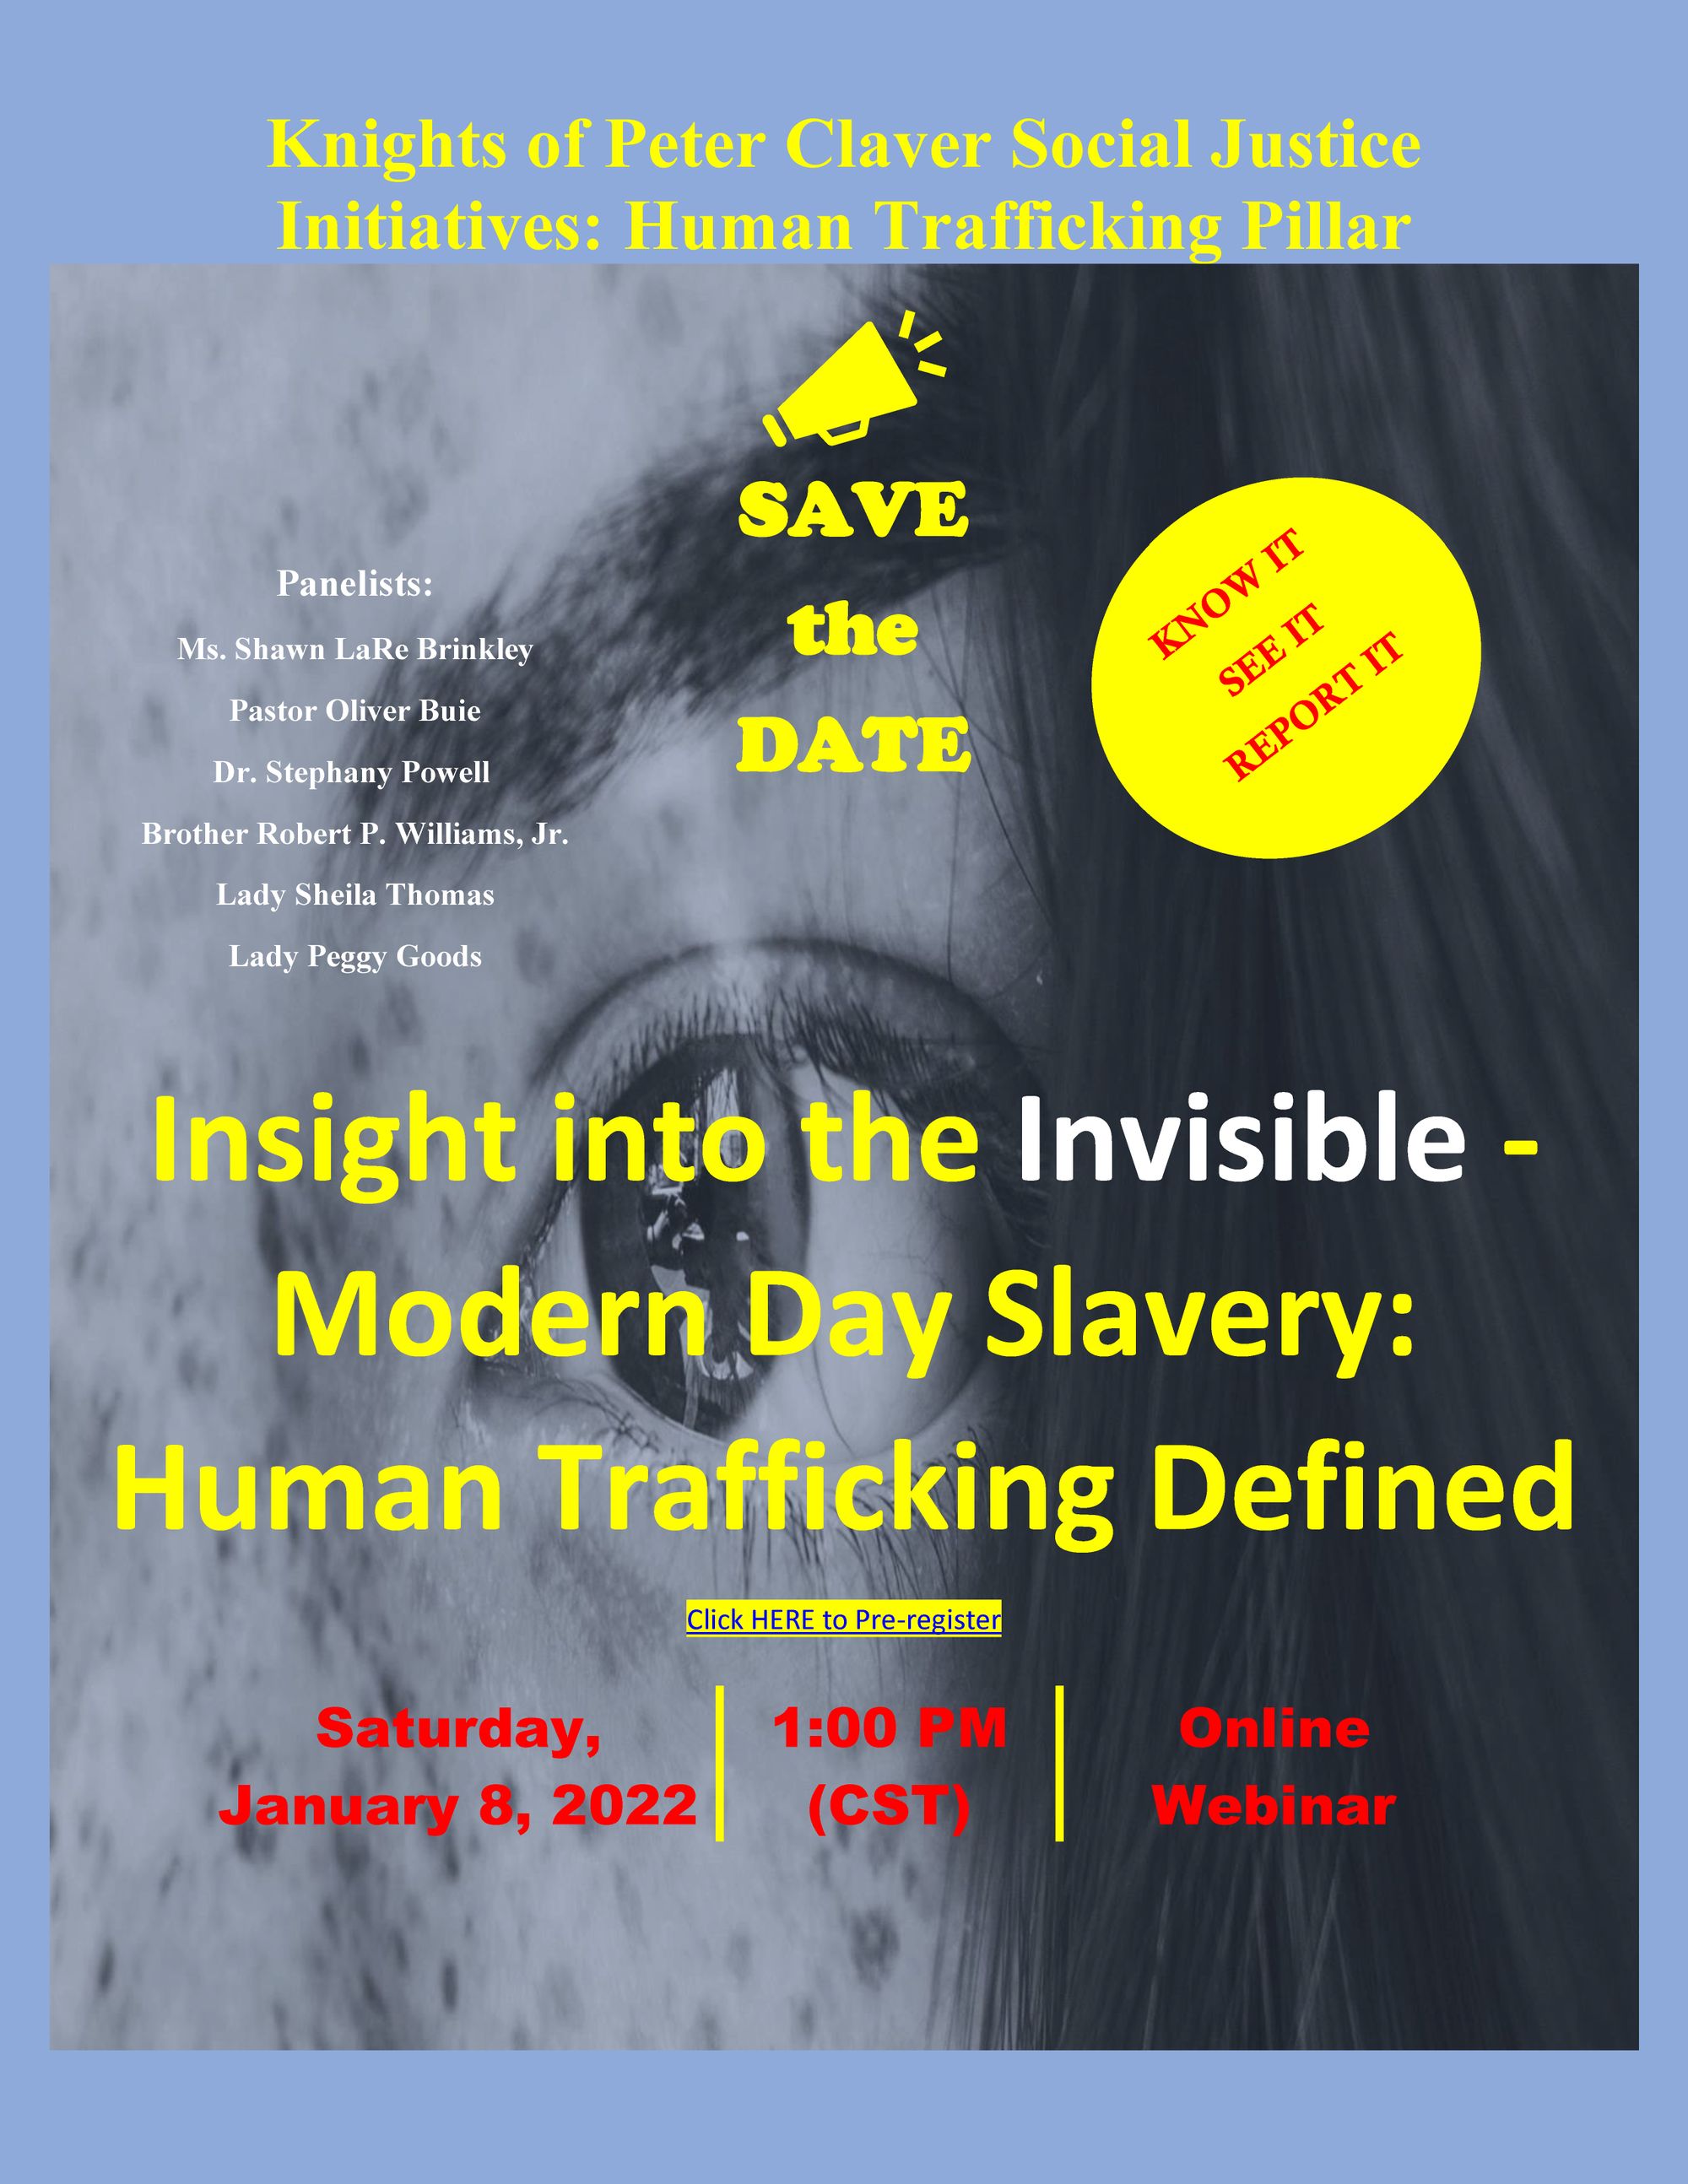 Knights of Peter Claver hosting webinar today on human trafficking